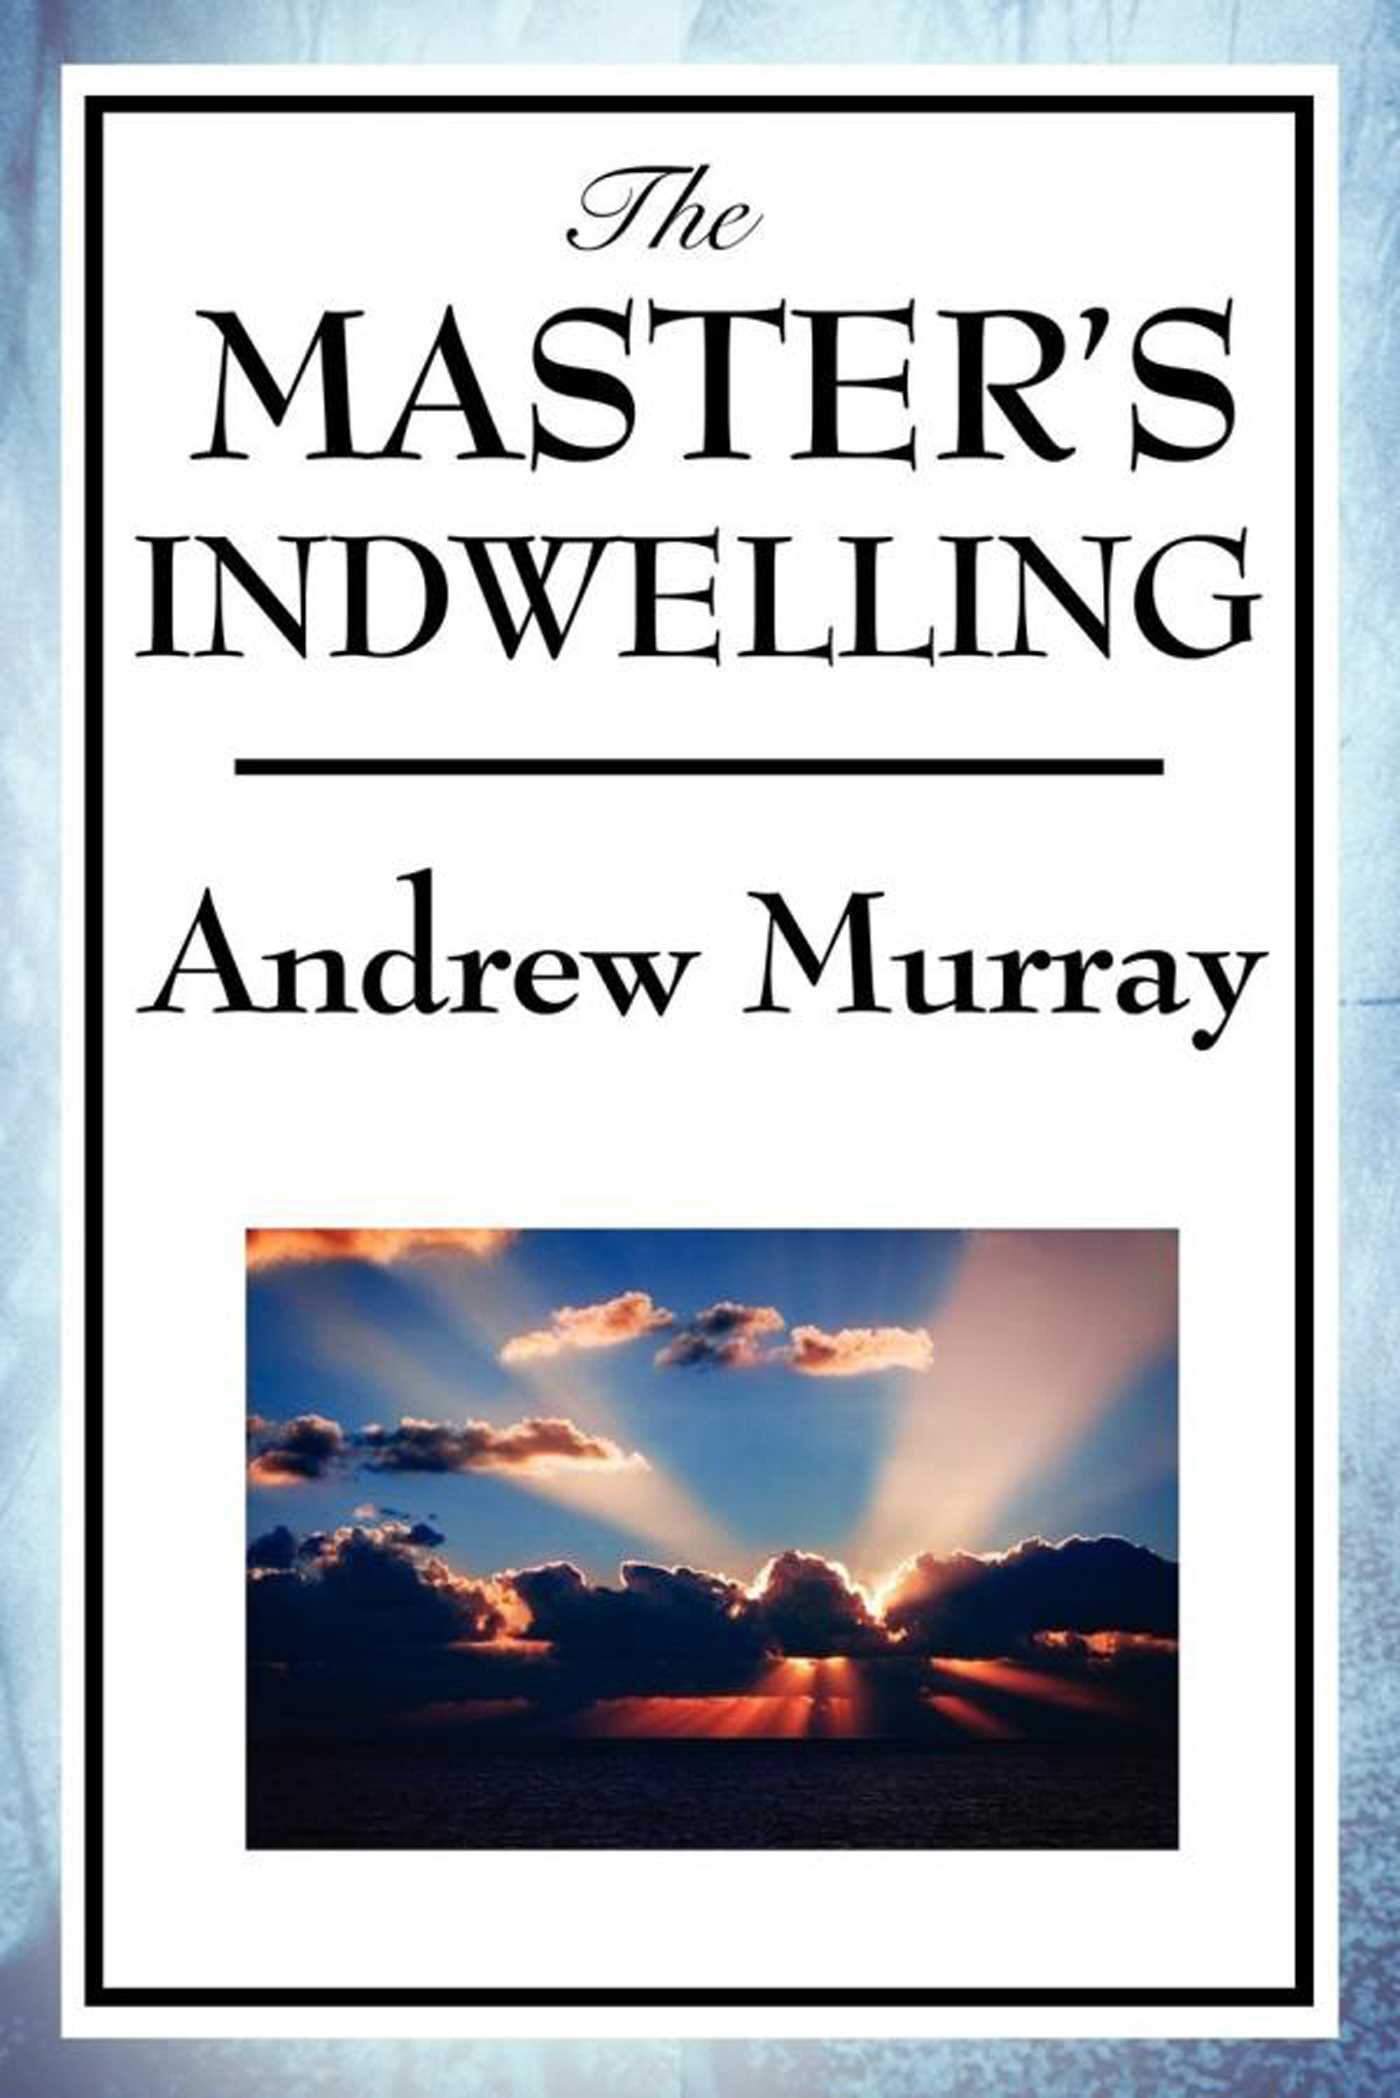 Murray Andrew Master's Indwelling is a work about the Christian's inner spiritual life in relation to God indwelling the believer.